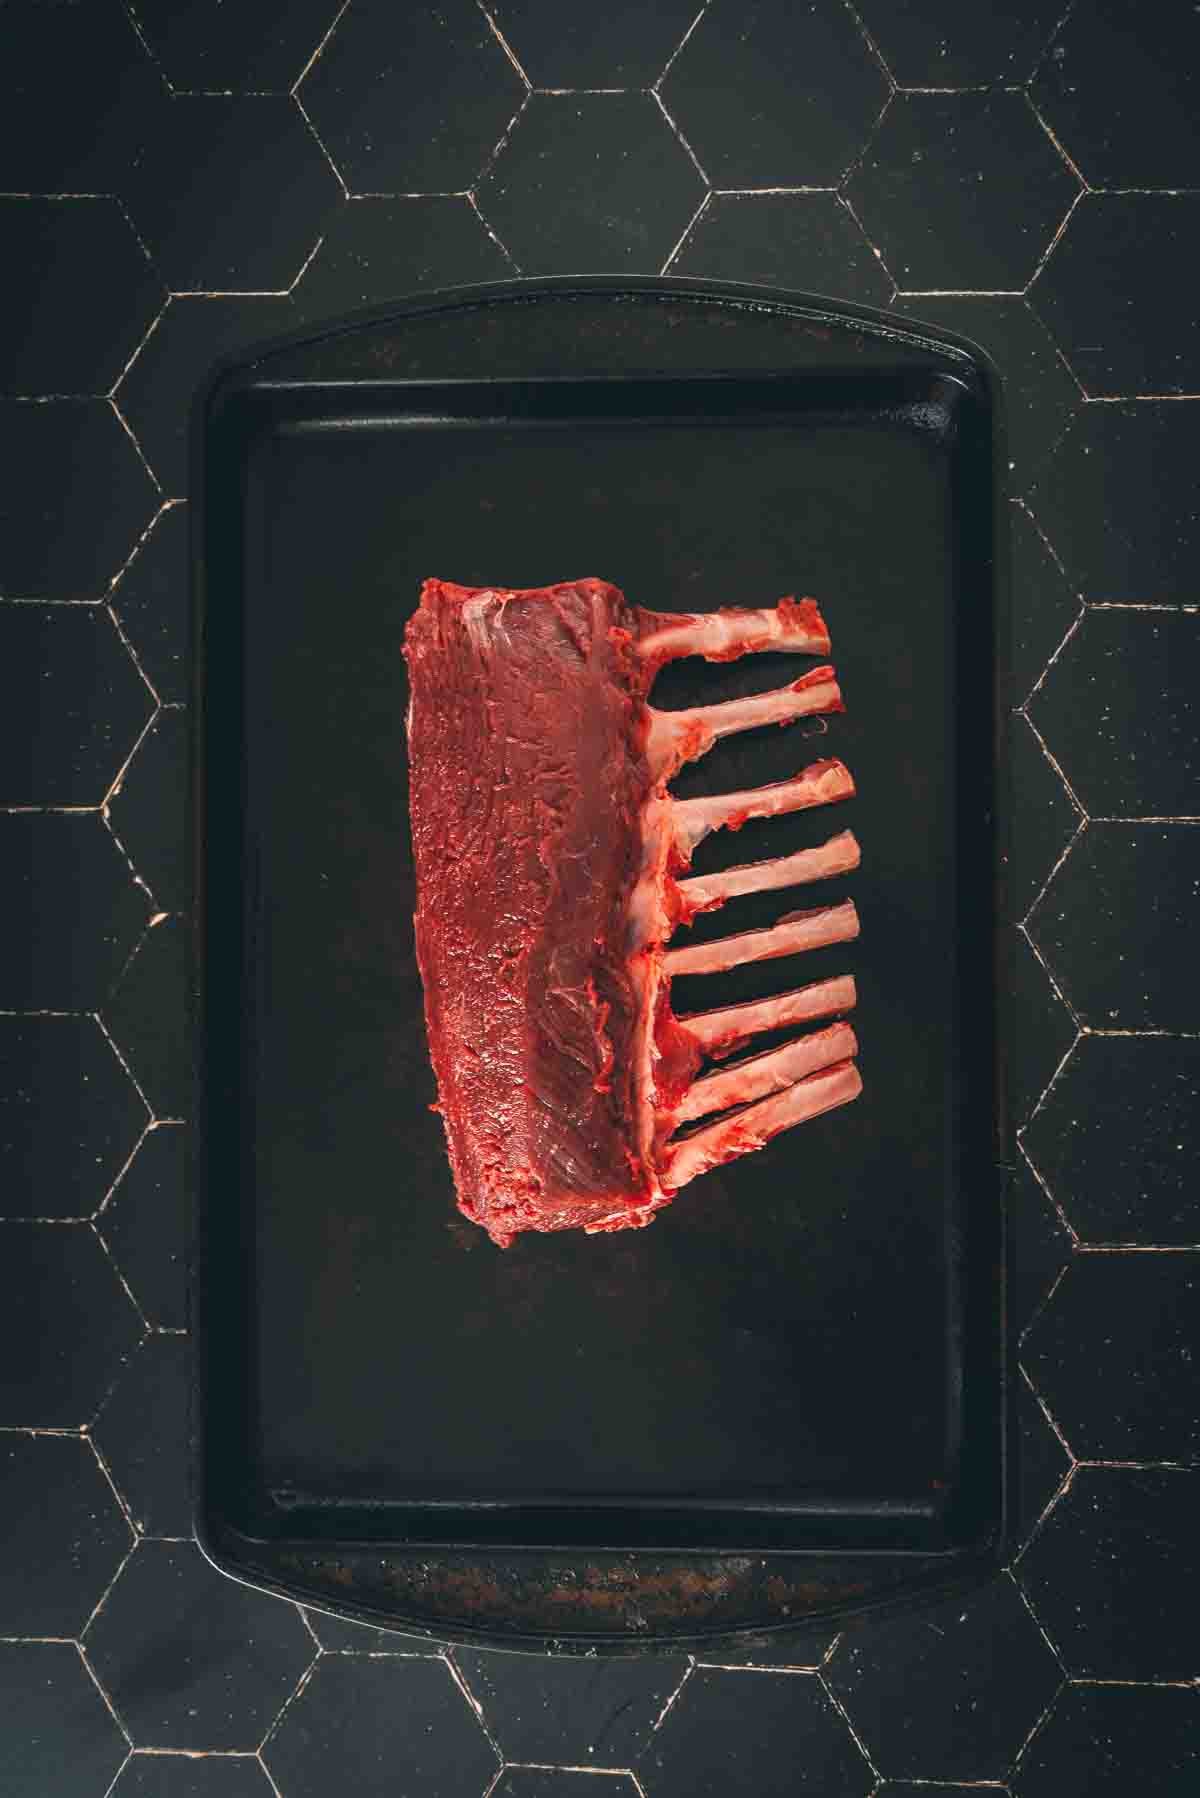 Beautifully frenched venison roast on a black board. 